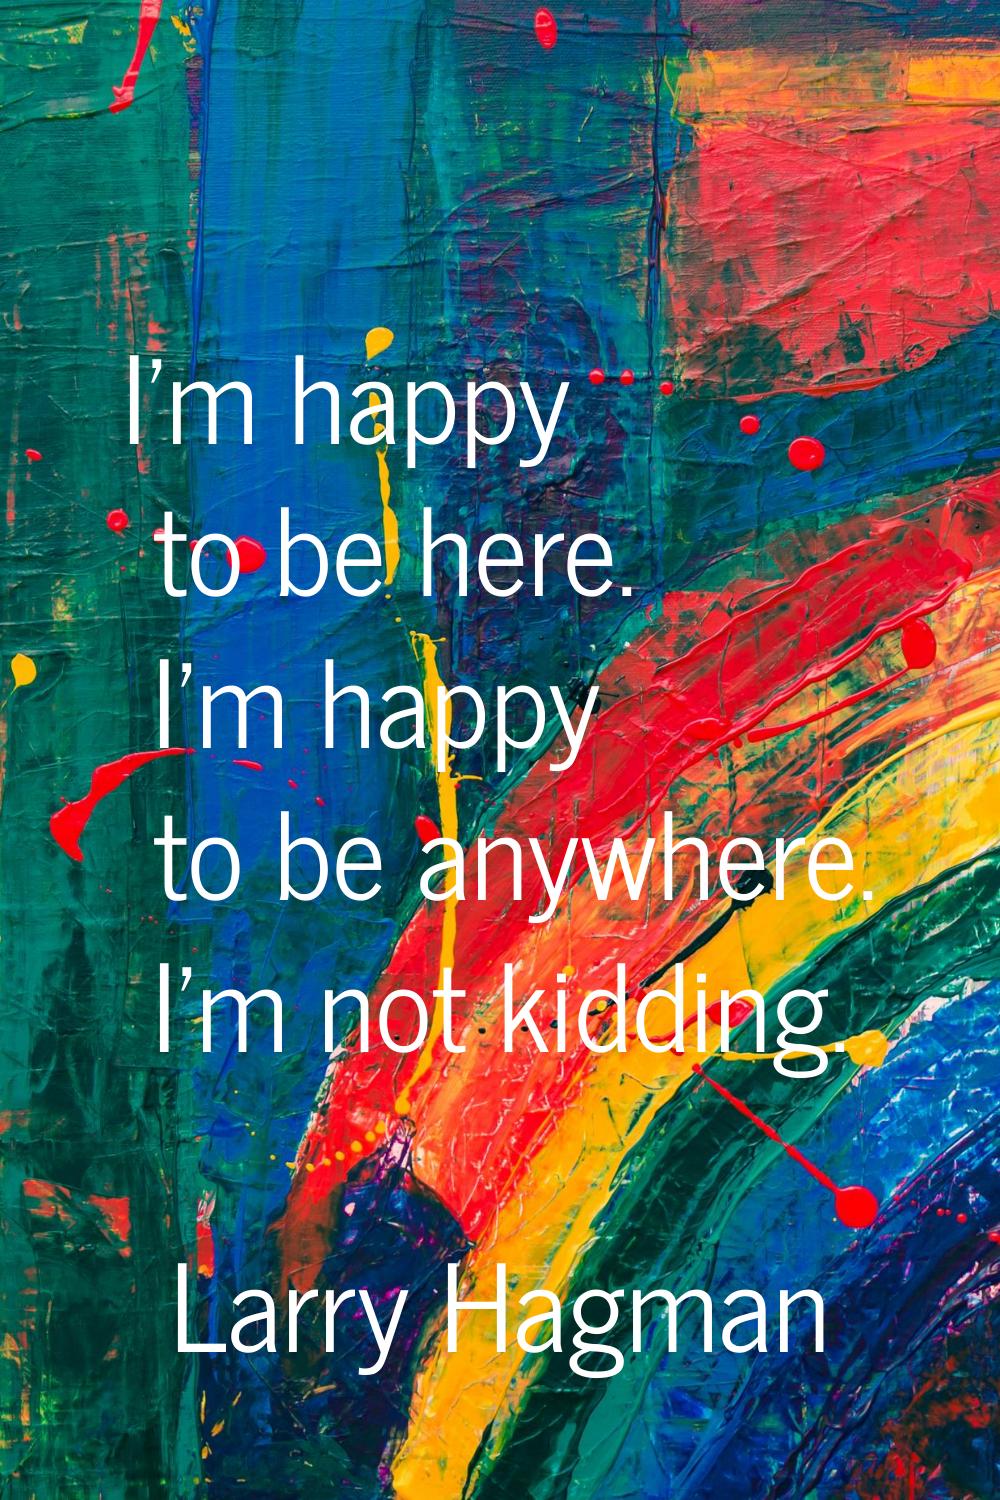 I'm happy to be here. I'm happy to be anywhere. I'm not kidding.